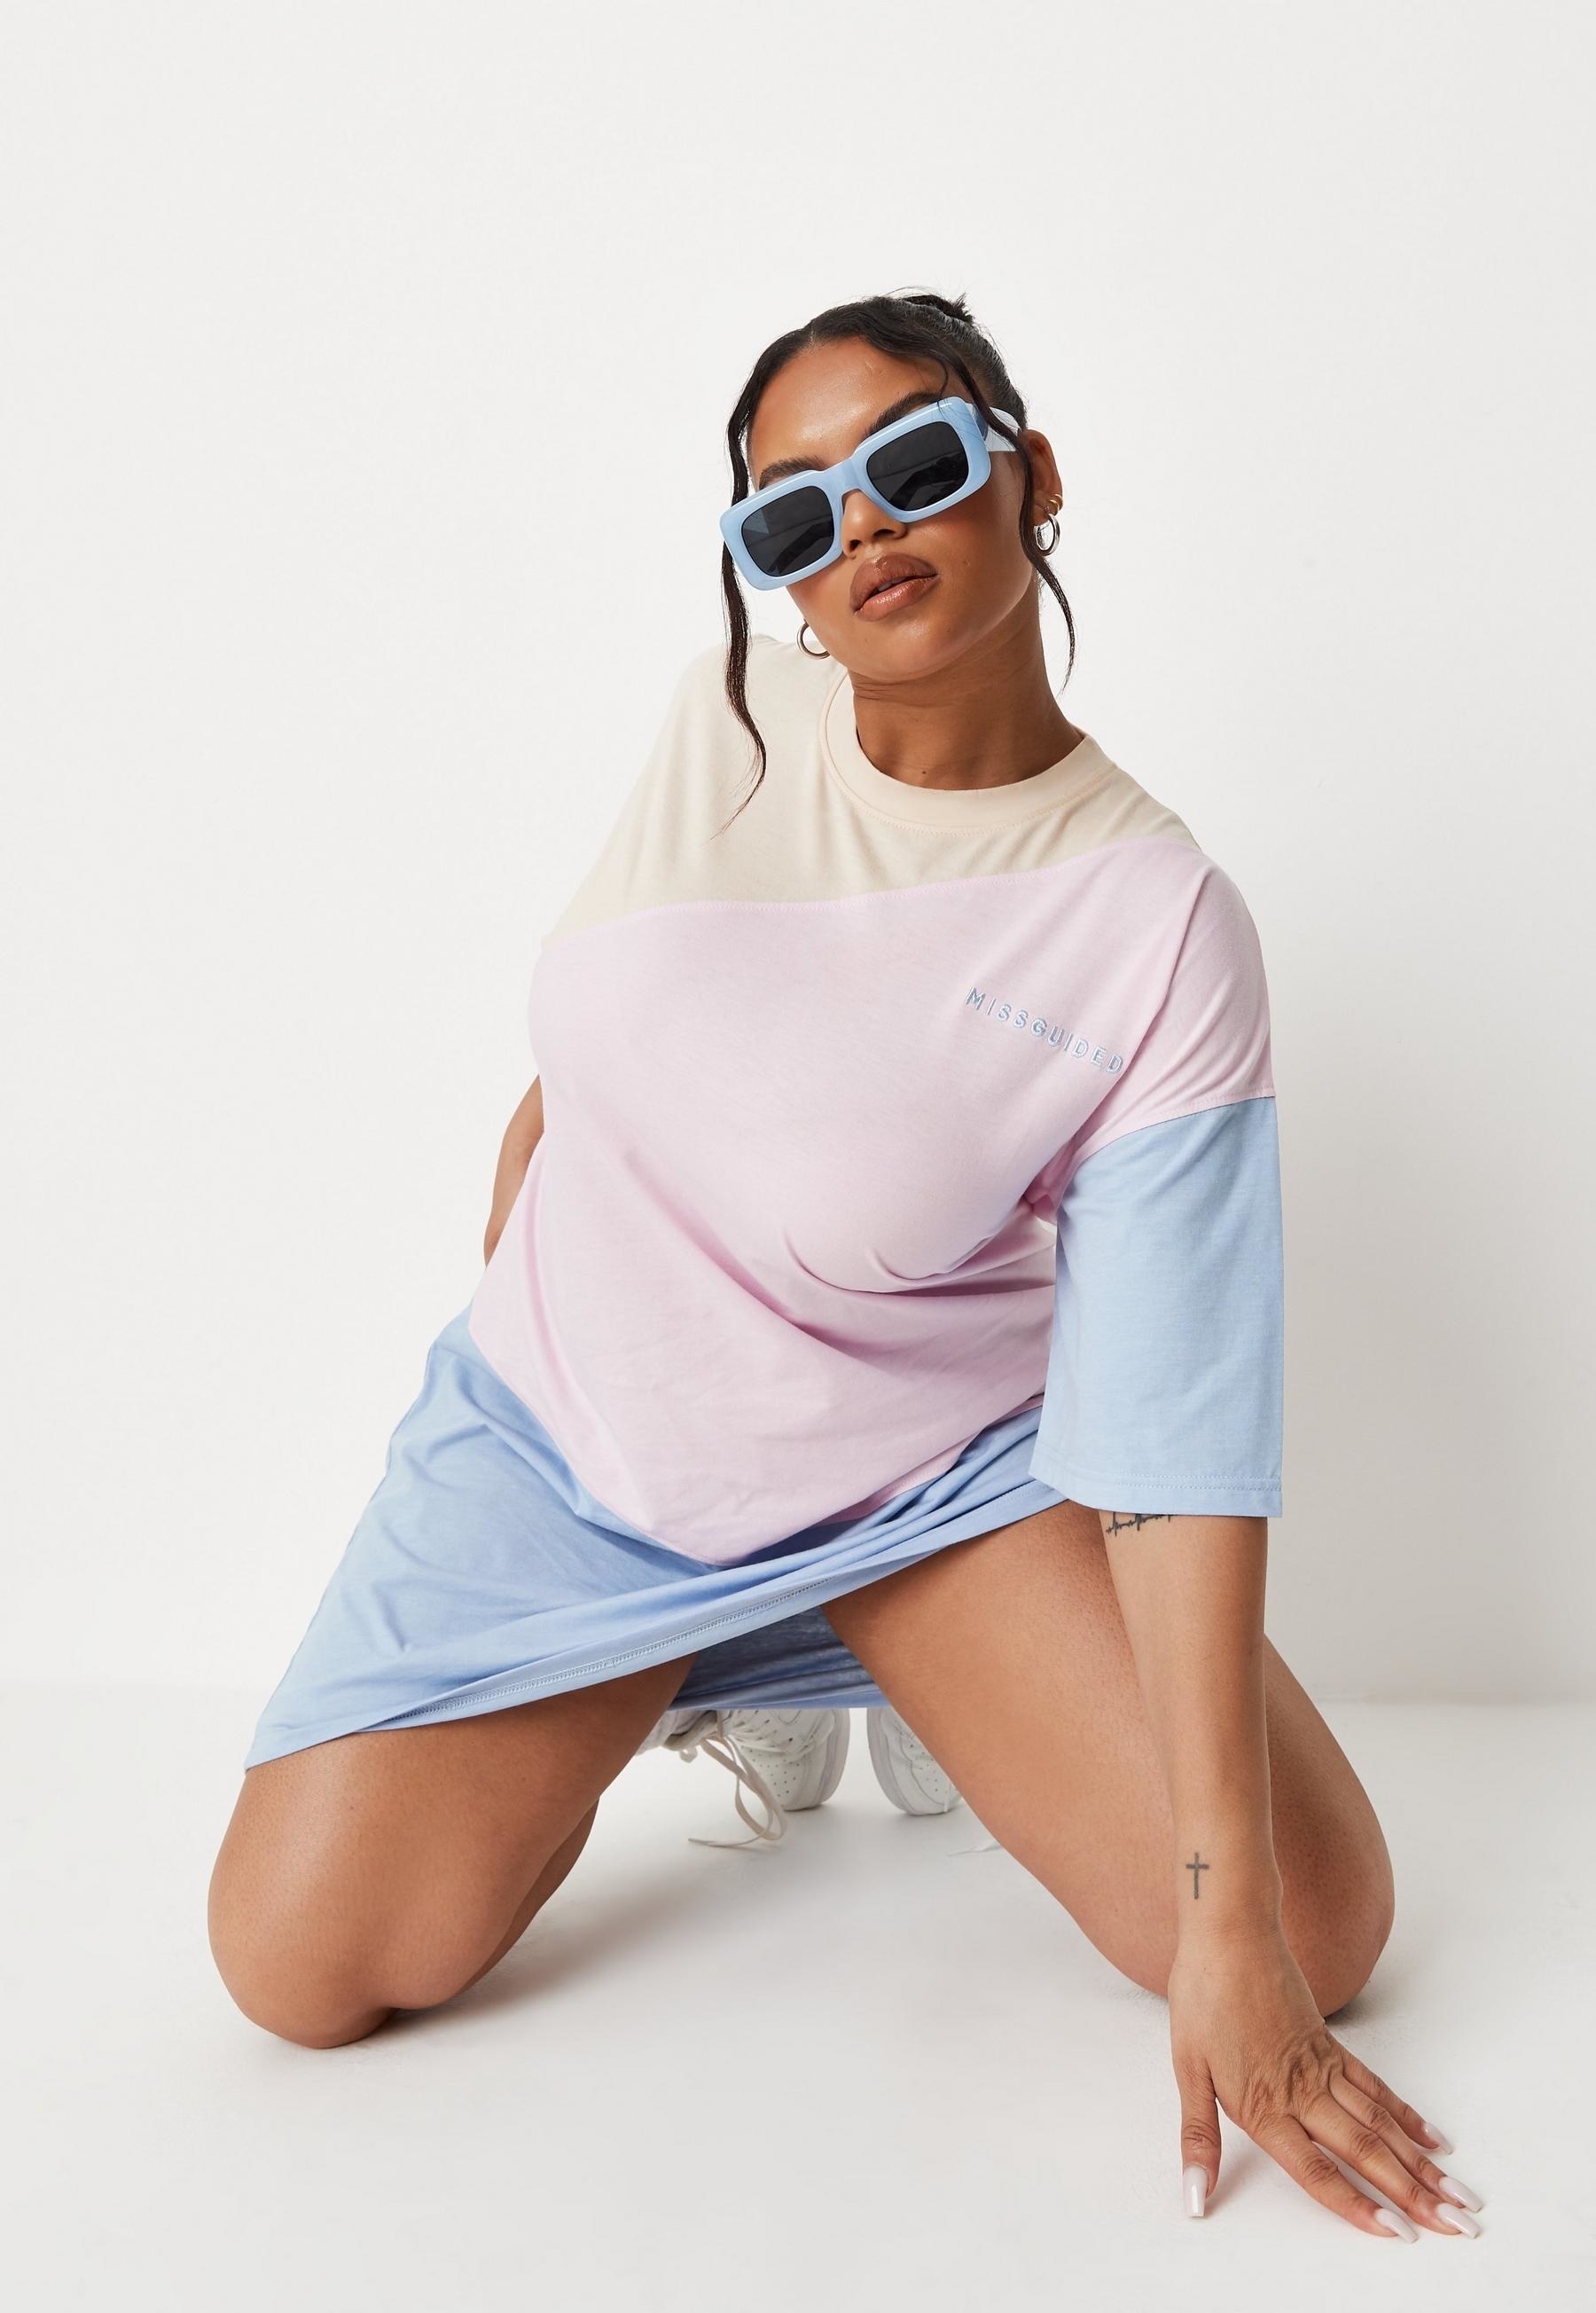 oversized shirt in blue, pink, and yellow